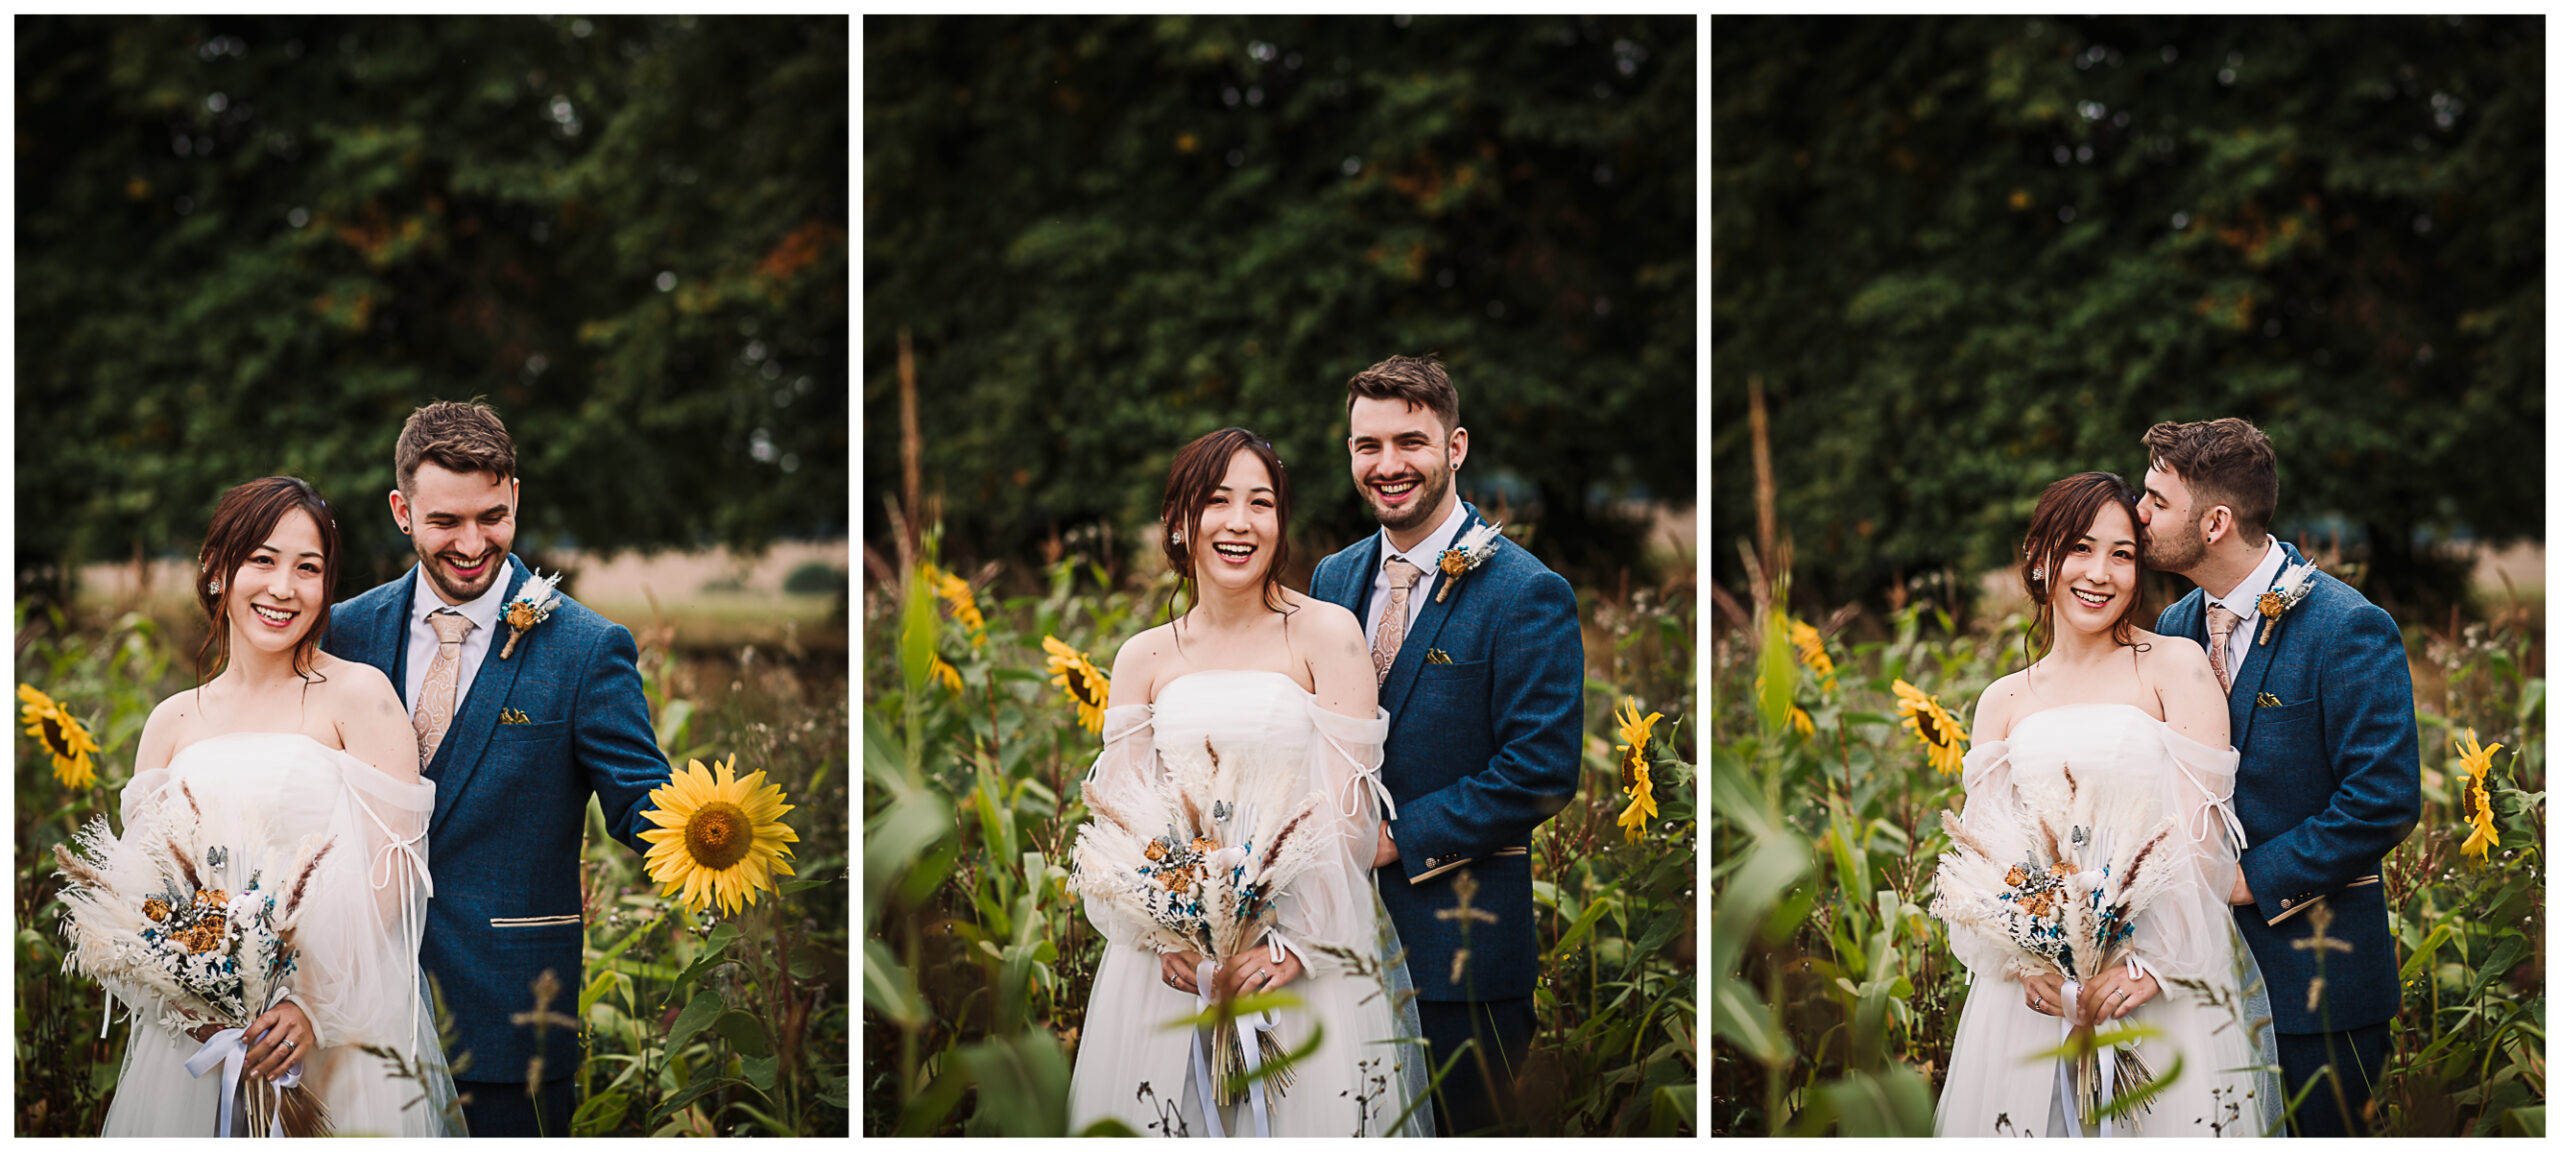 Bride and groom photographed in a Hertfordshire field of sunflowers